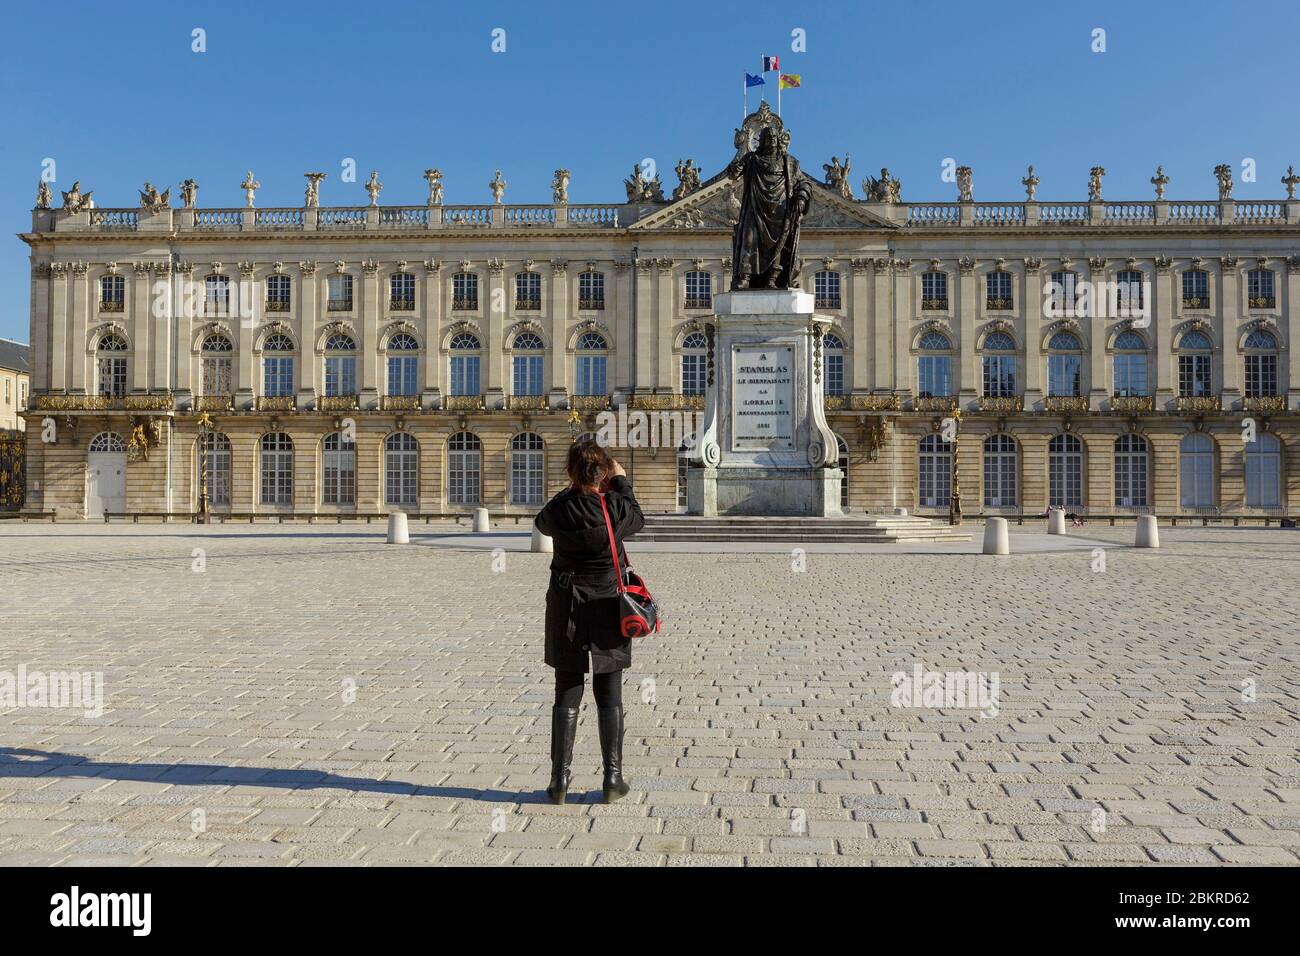 France, Meurthe et Moselle, Nancy, Covid 19 or Coronavirus lockdown, Stanislas square (former royal square) built by Stanislas Lescynski, king of Poland and last duke of Lorraine in the 18th century, listed as World Heritage by UNESCO, facade of the townhall, statue of Stanislas, railings and street lamps by Jean Lamour Stock Photo